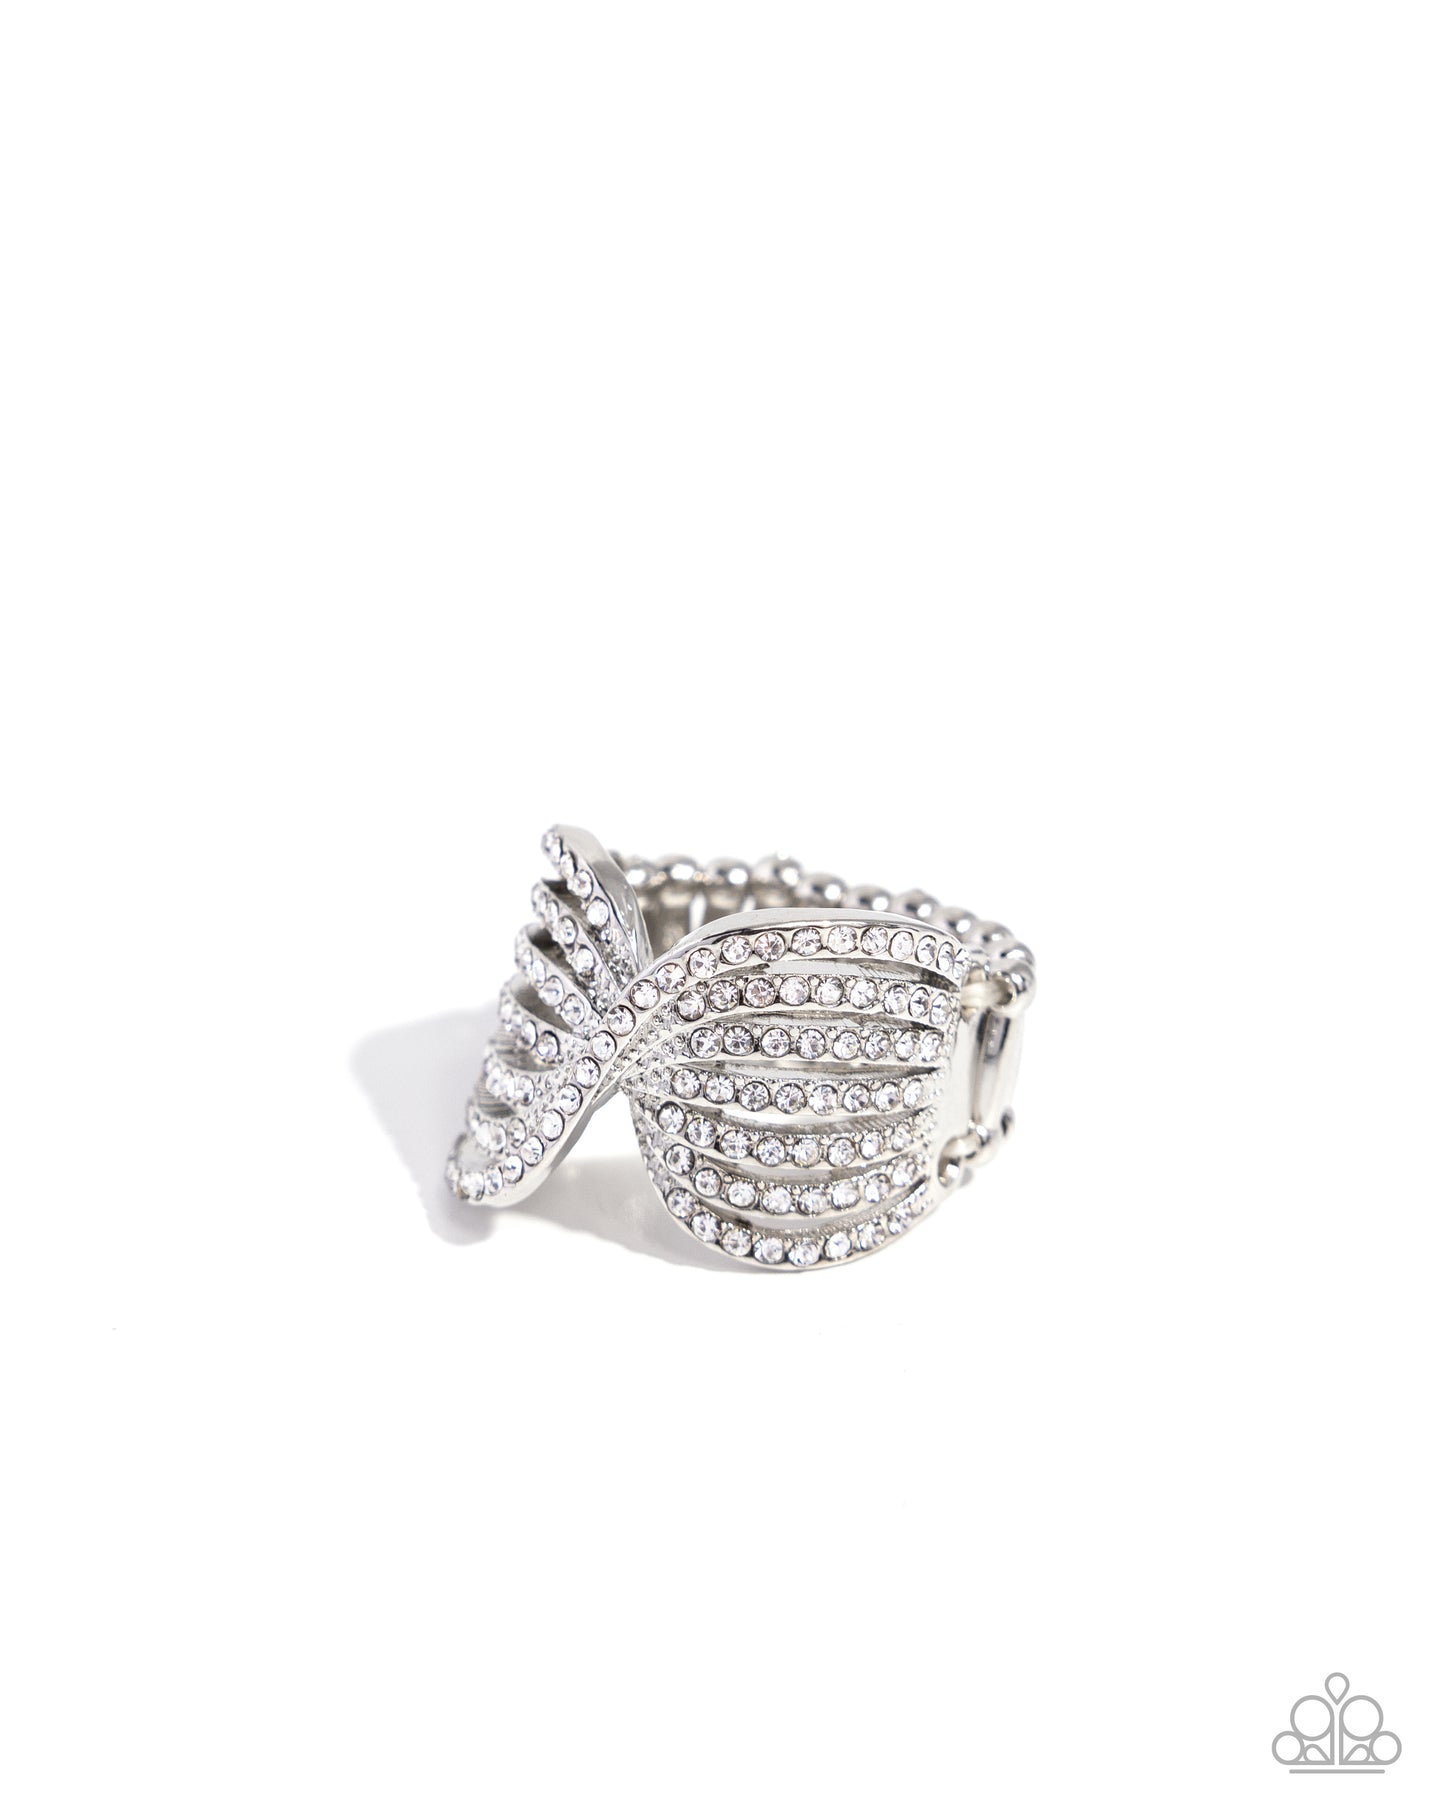 <p>Encrusted in glassy white rhinestones, glistening silver ribbons loop and twist across the center of the finger for a refined look. Features a stretchy band for a flexible fit.</p> <p><i> Sold as one individual ring.</i></p>